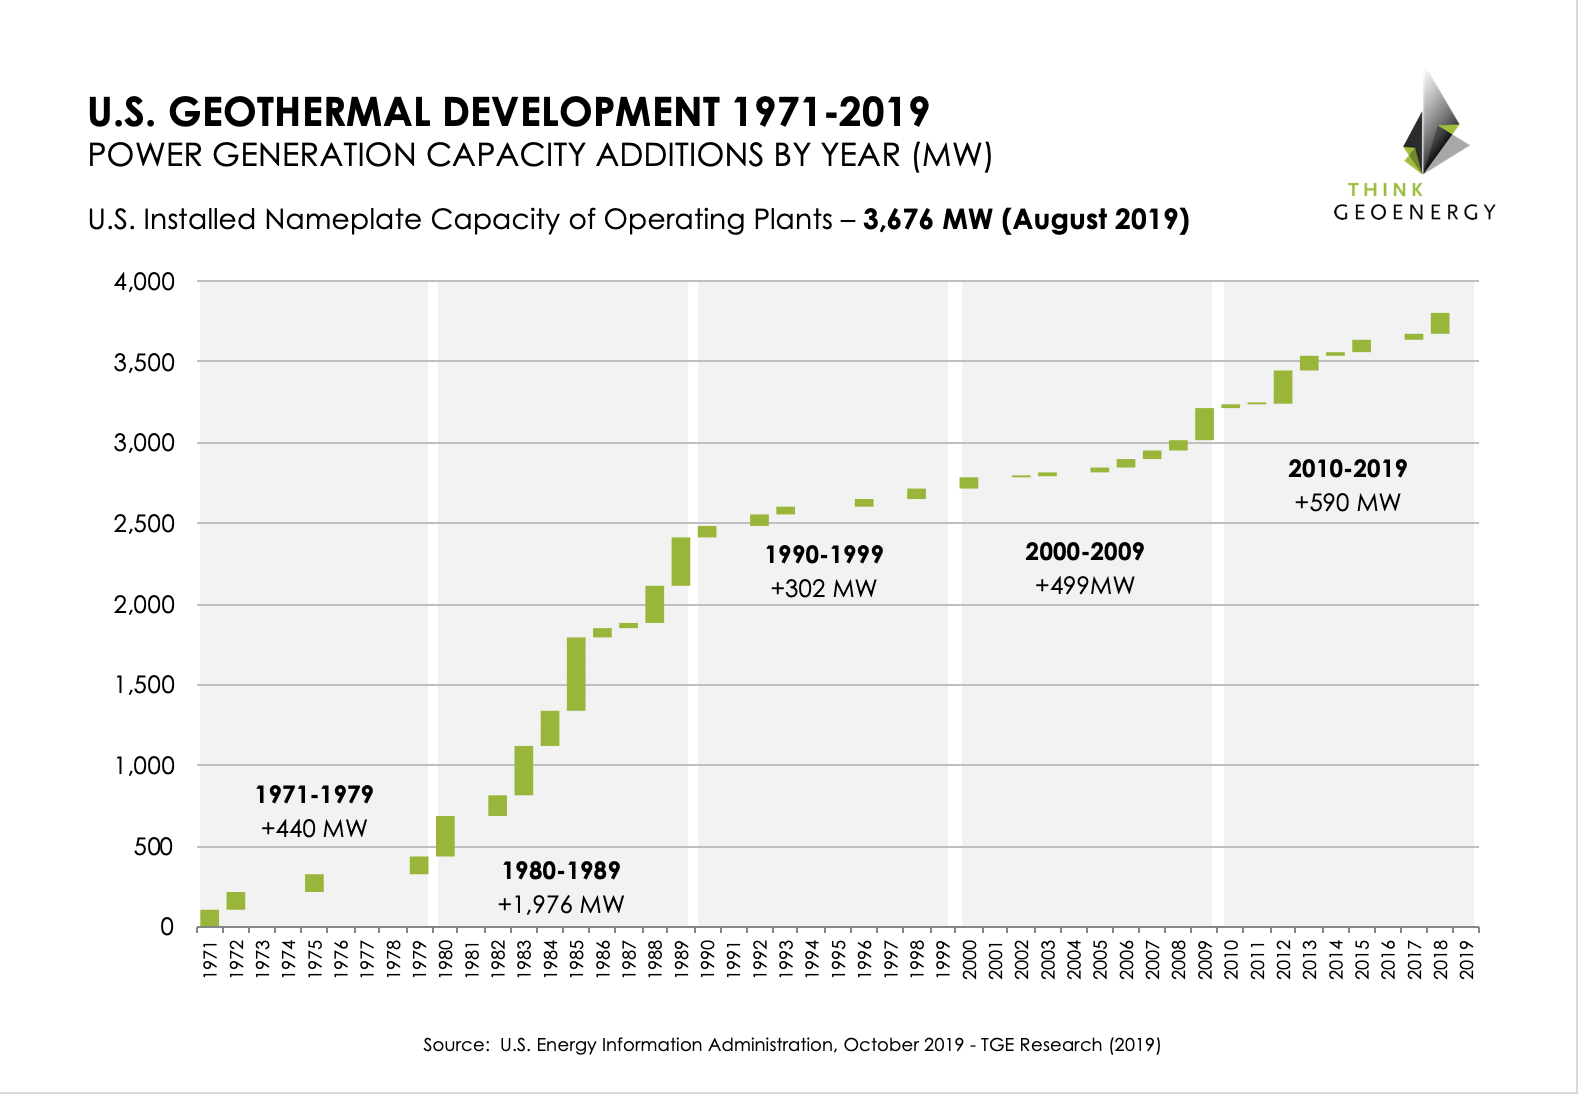 Development of installed geothermal power generation capacity in the U